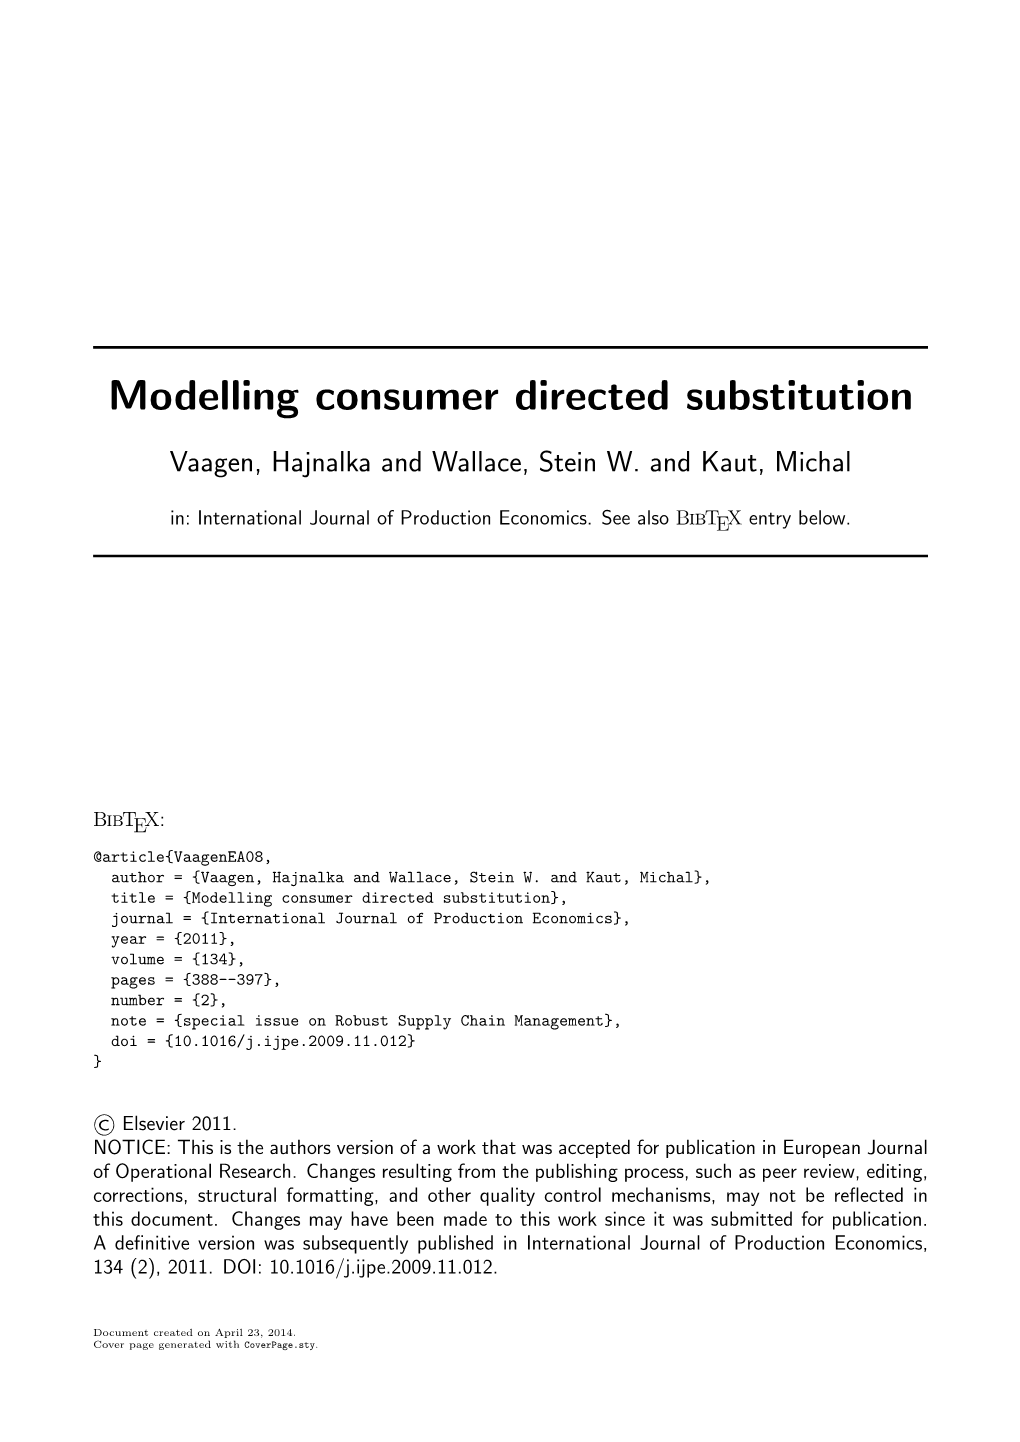 Modelling Consumer Directed Substitution